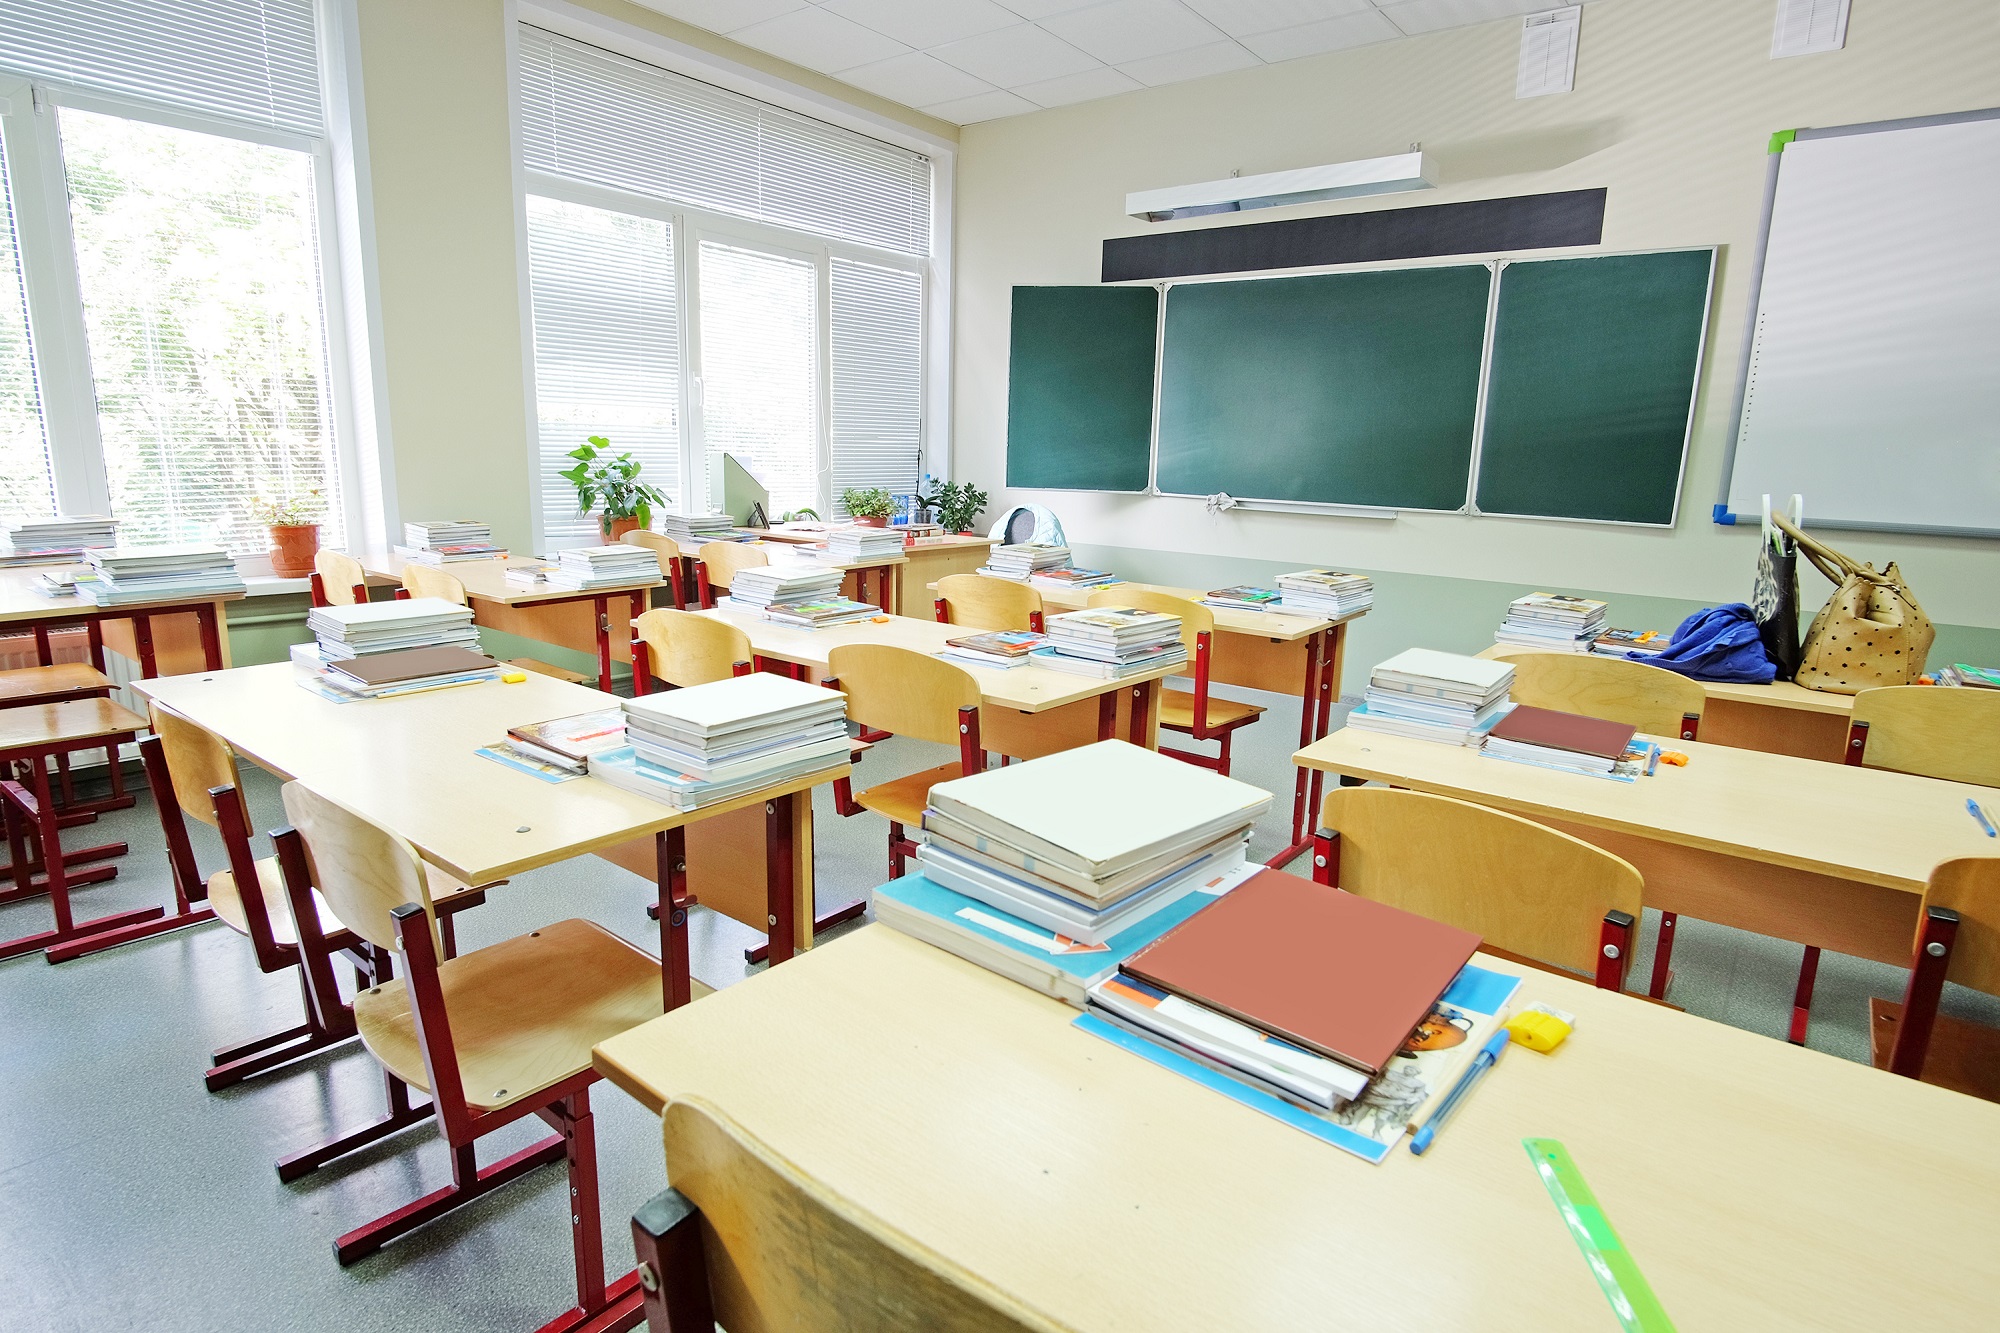 School Cleaning Services Richfield MN